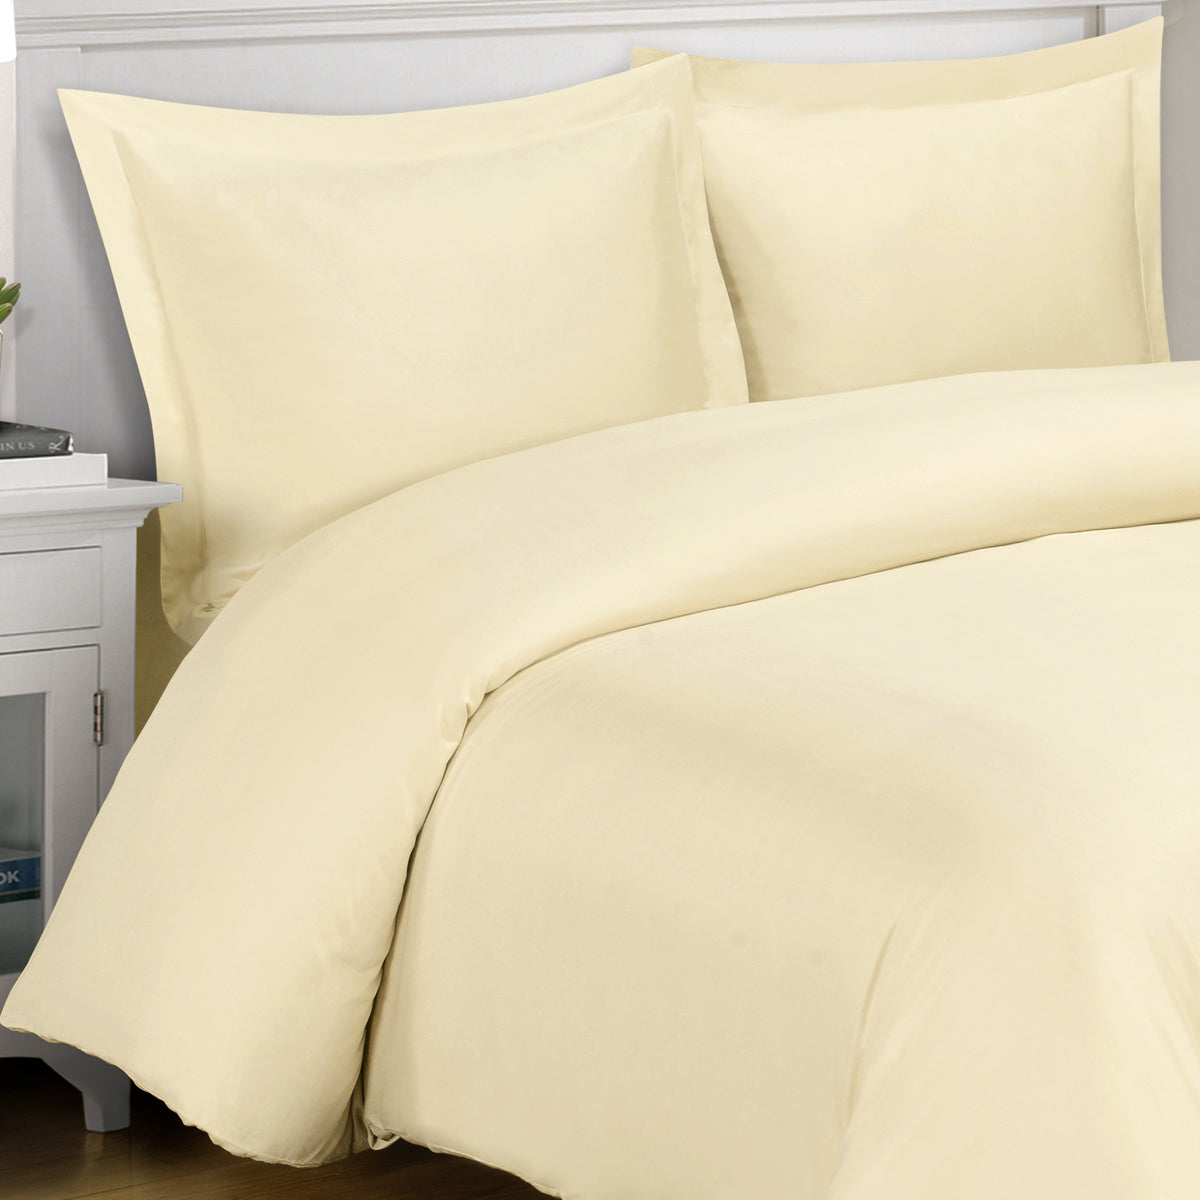 Buy Queen Size Flat Sheet Ivory Egyptian Cotton 1000 Thread Count at- Egyptianhomelinens.com